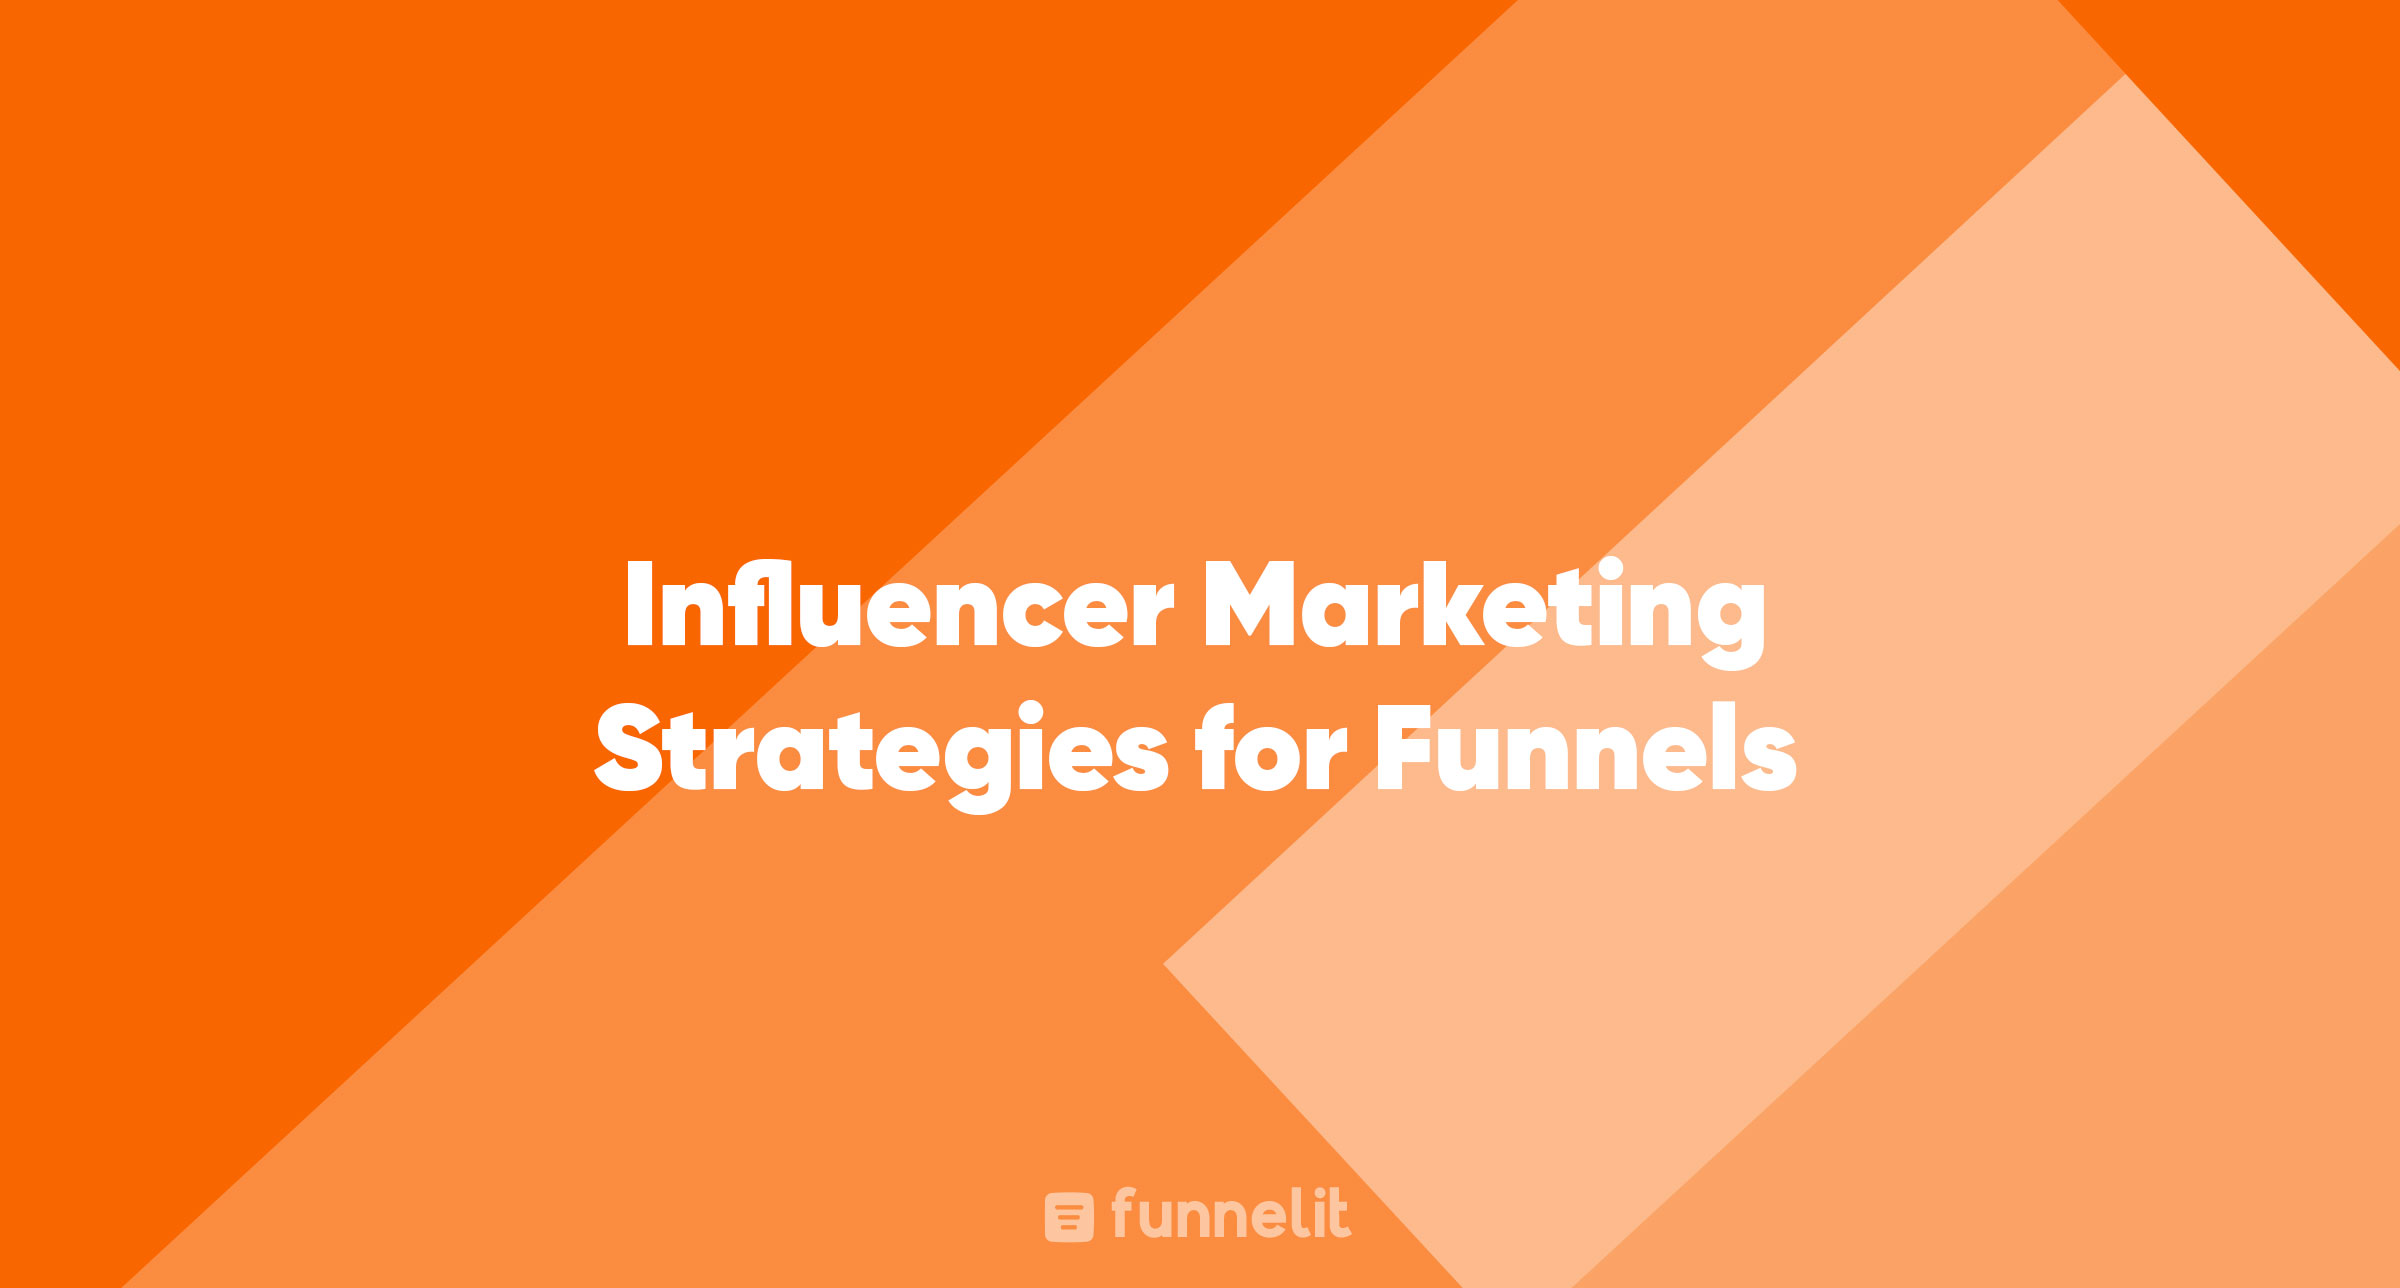 Article | Influencer Marketing Strategies for Funnels